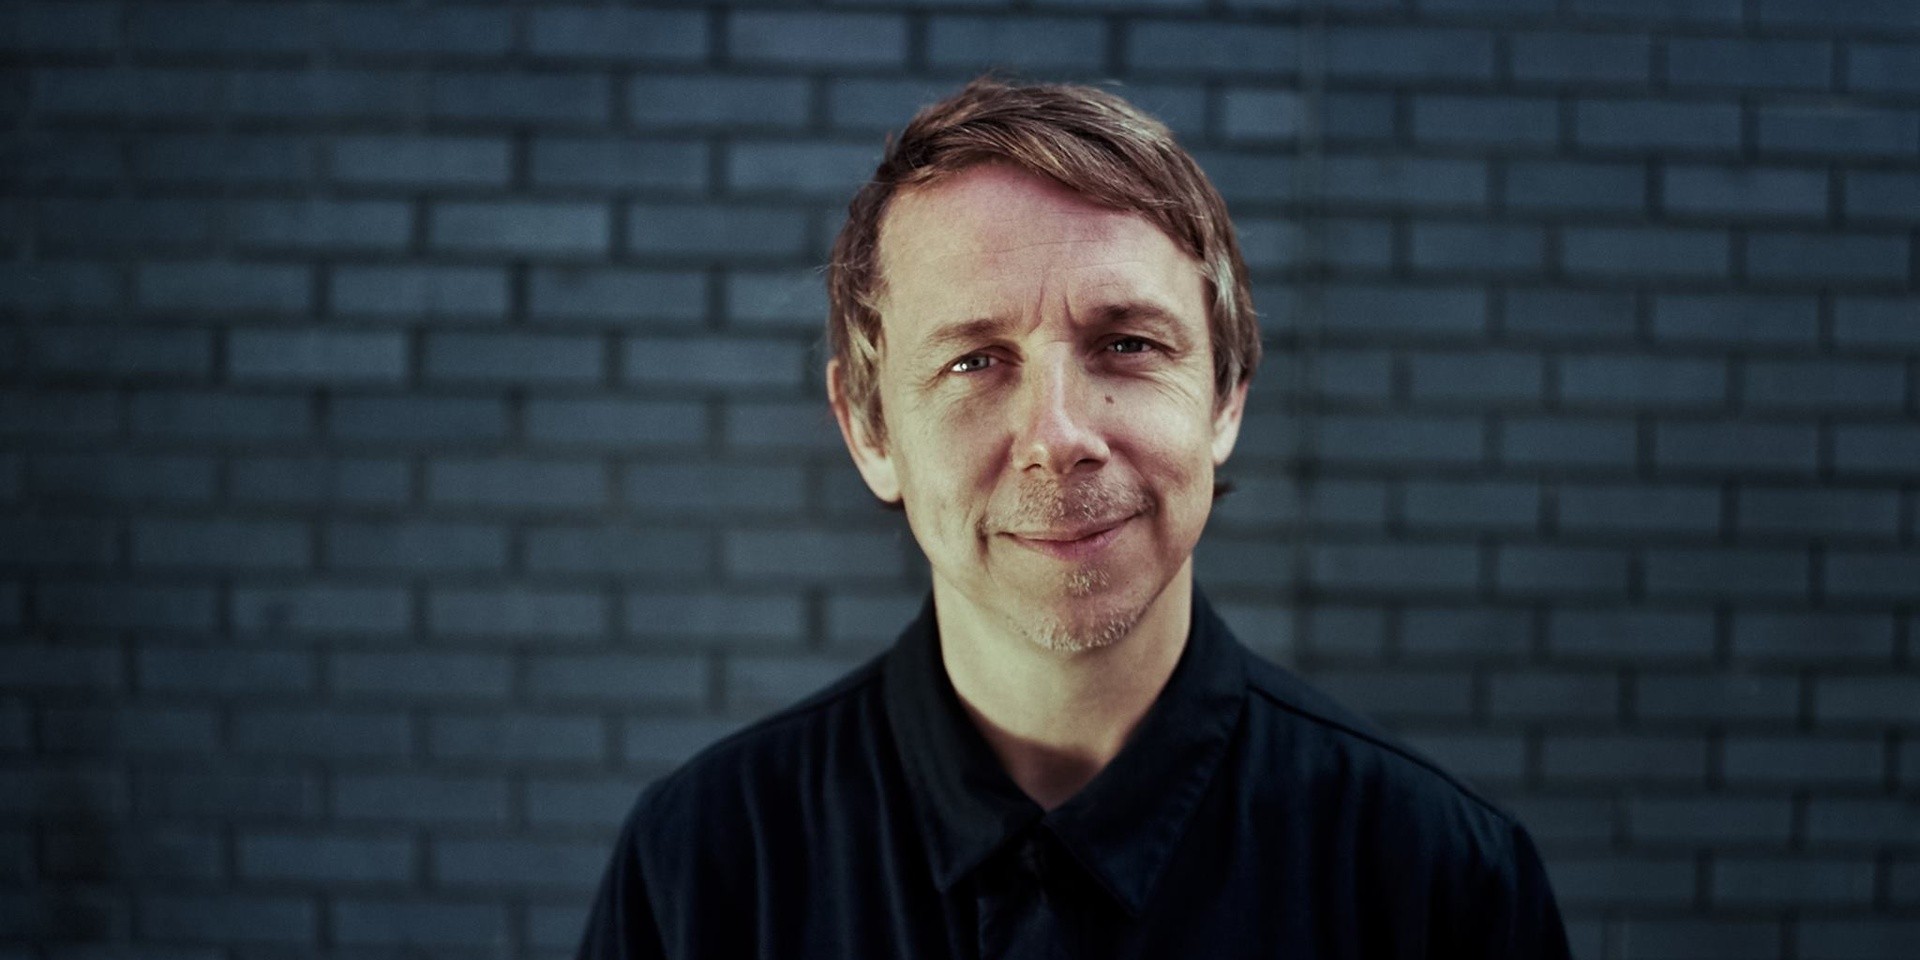 Darker Than Wax to play pilot show on Gilles Peterson's Worldwide FM